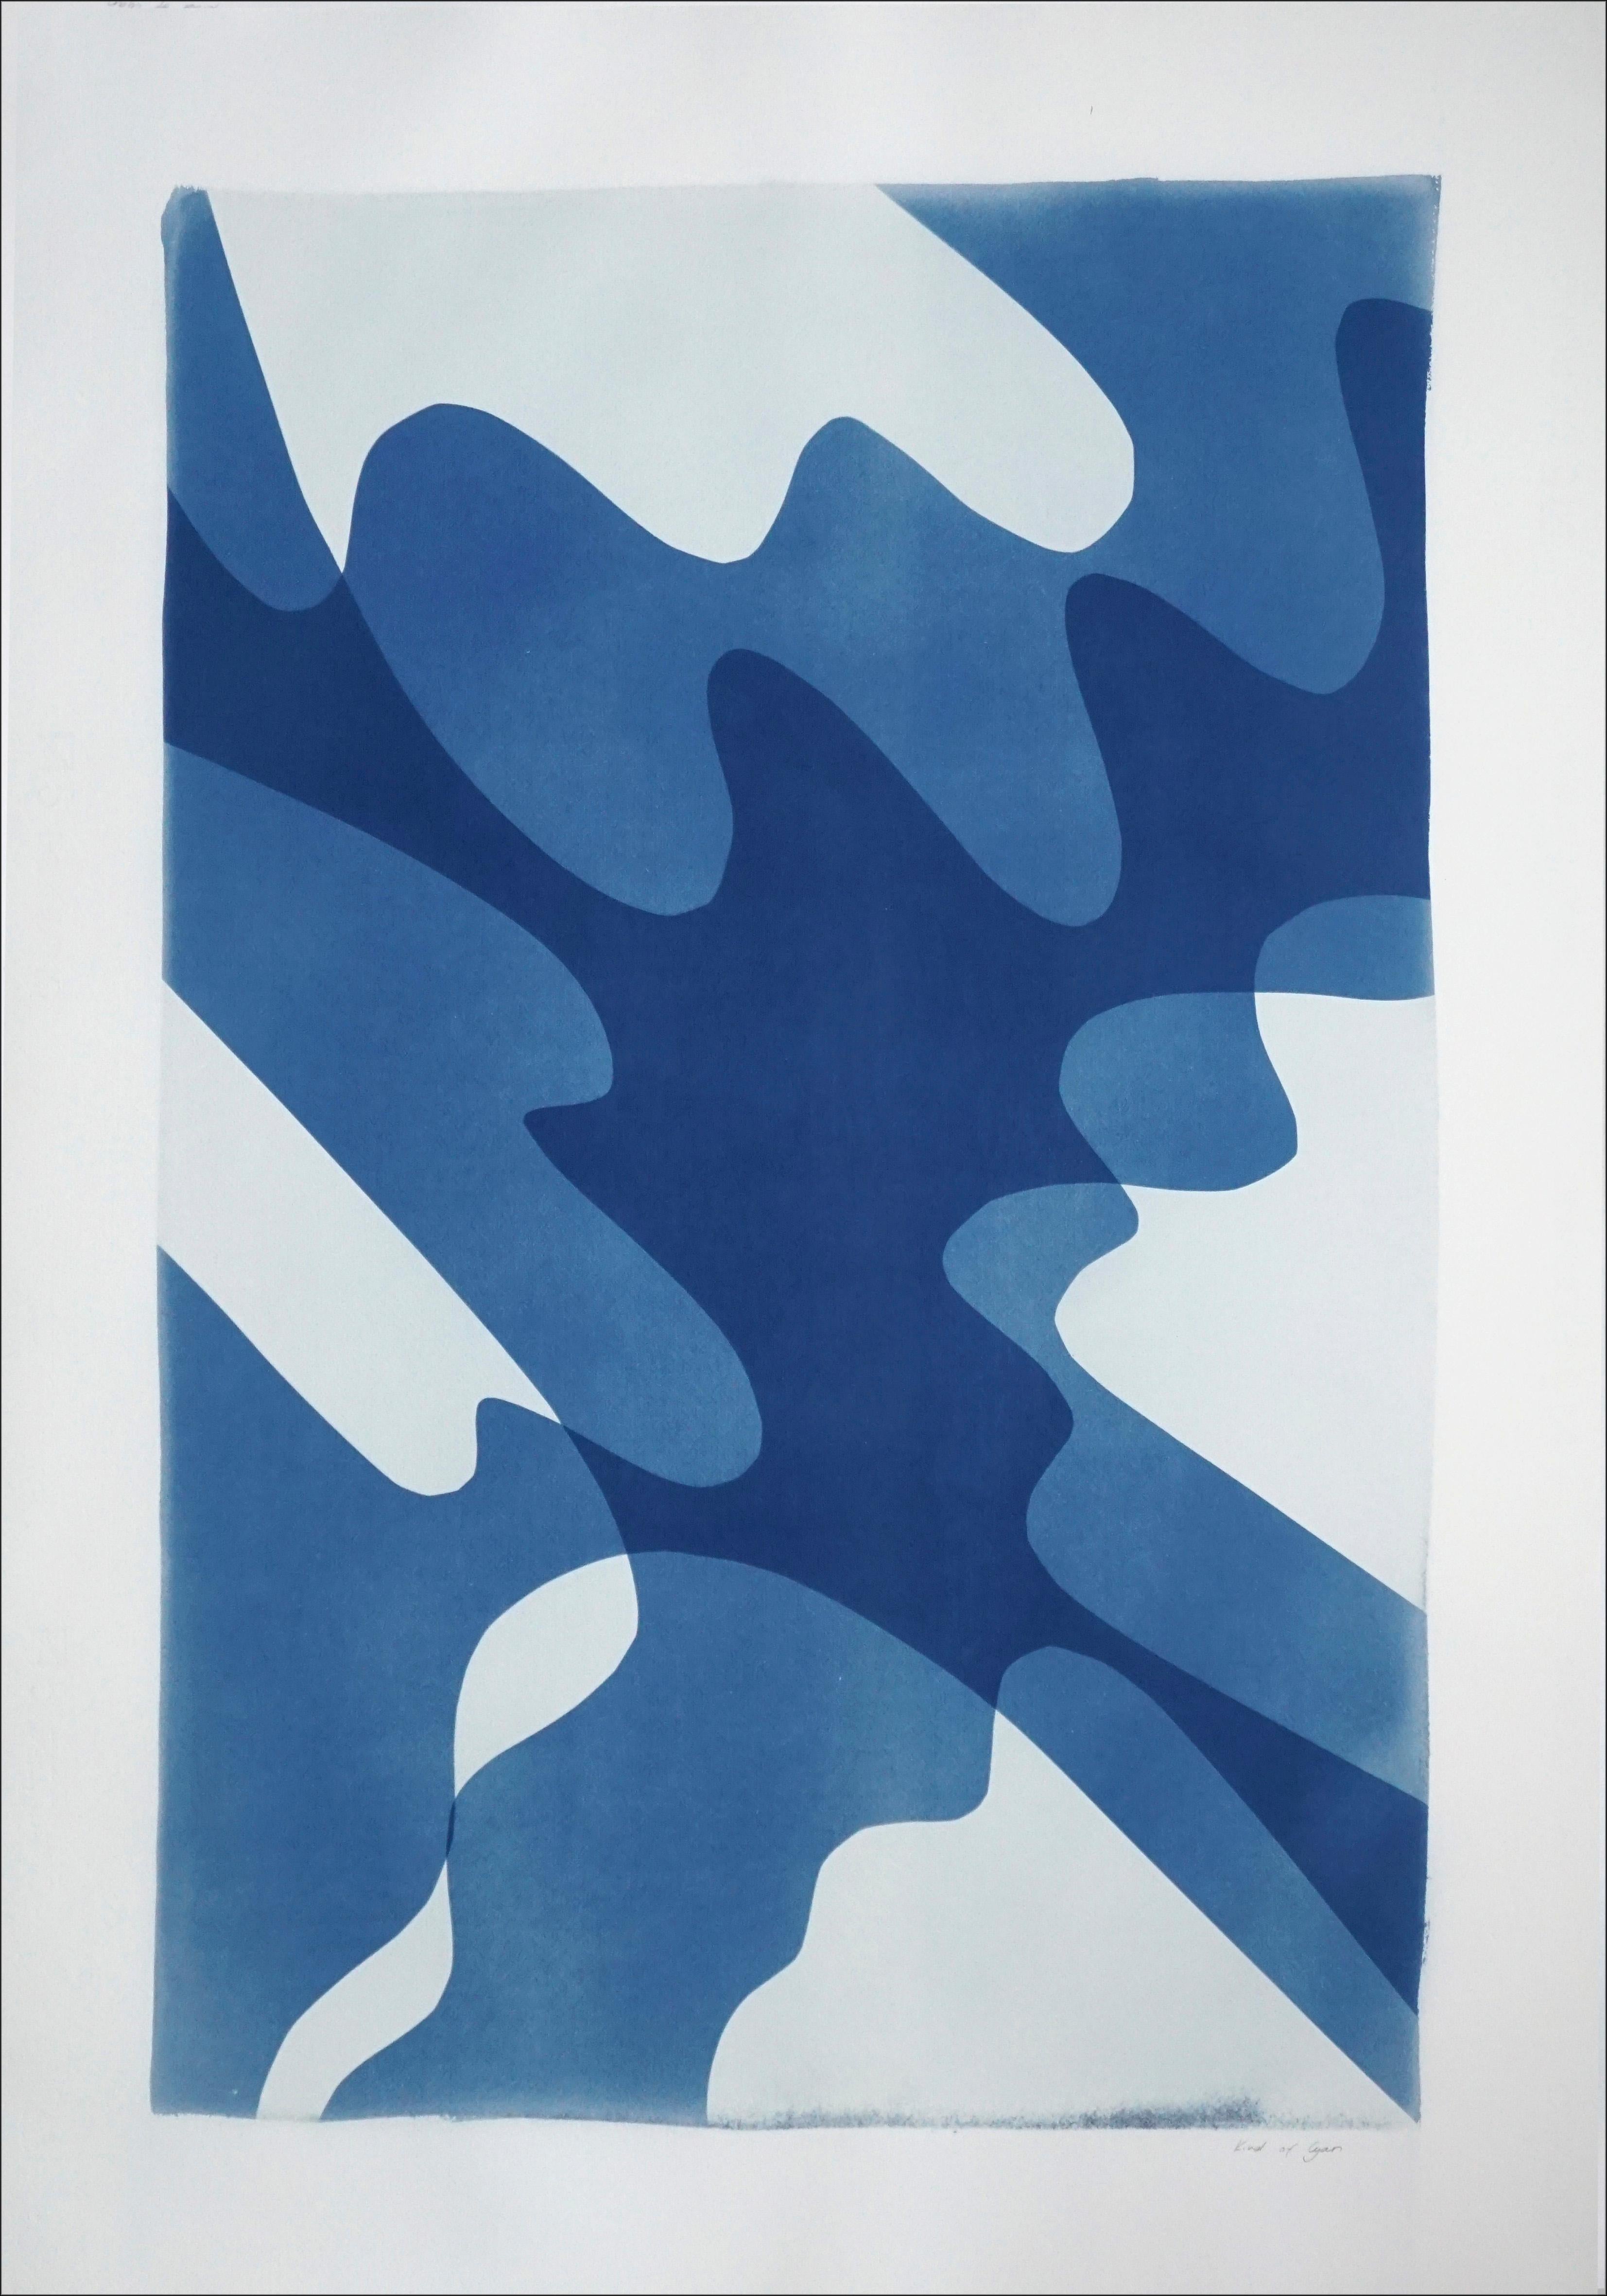 Shaky Shadows, Handmade Monotype of Minimal Abstract Shapes and Layers in Blue